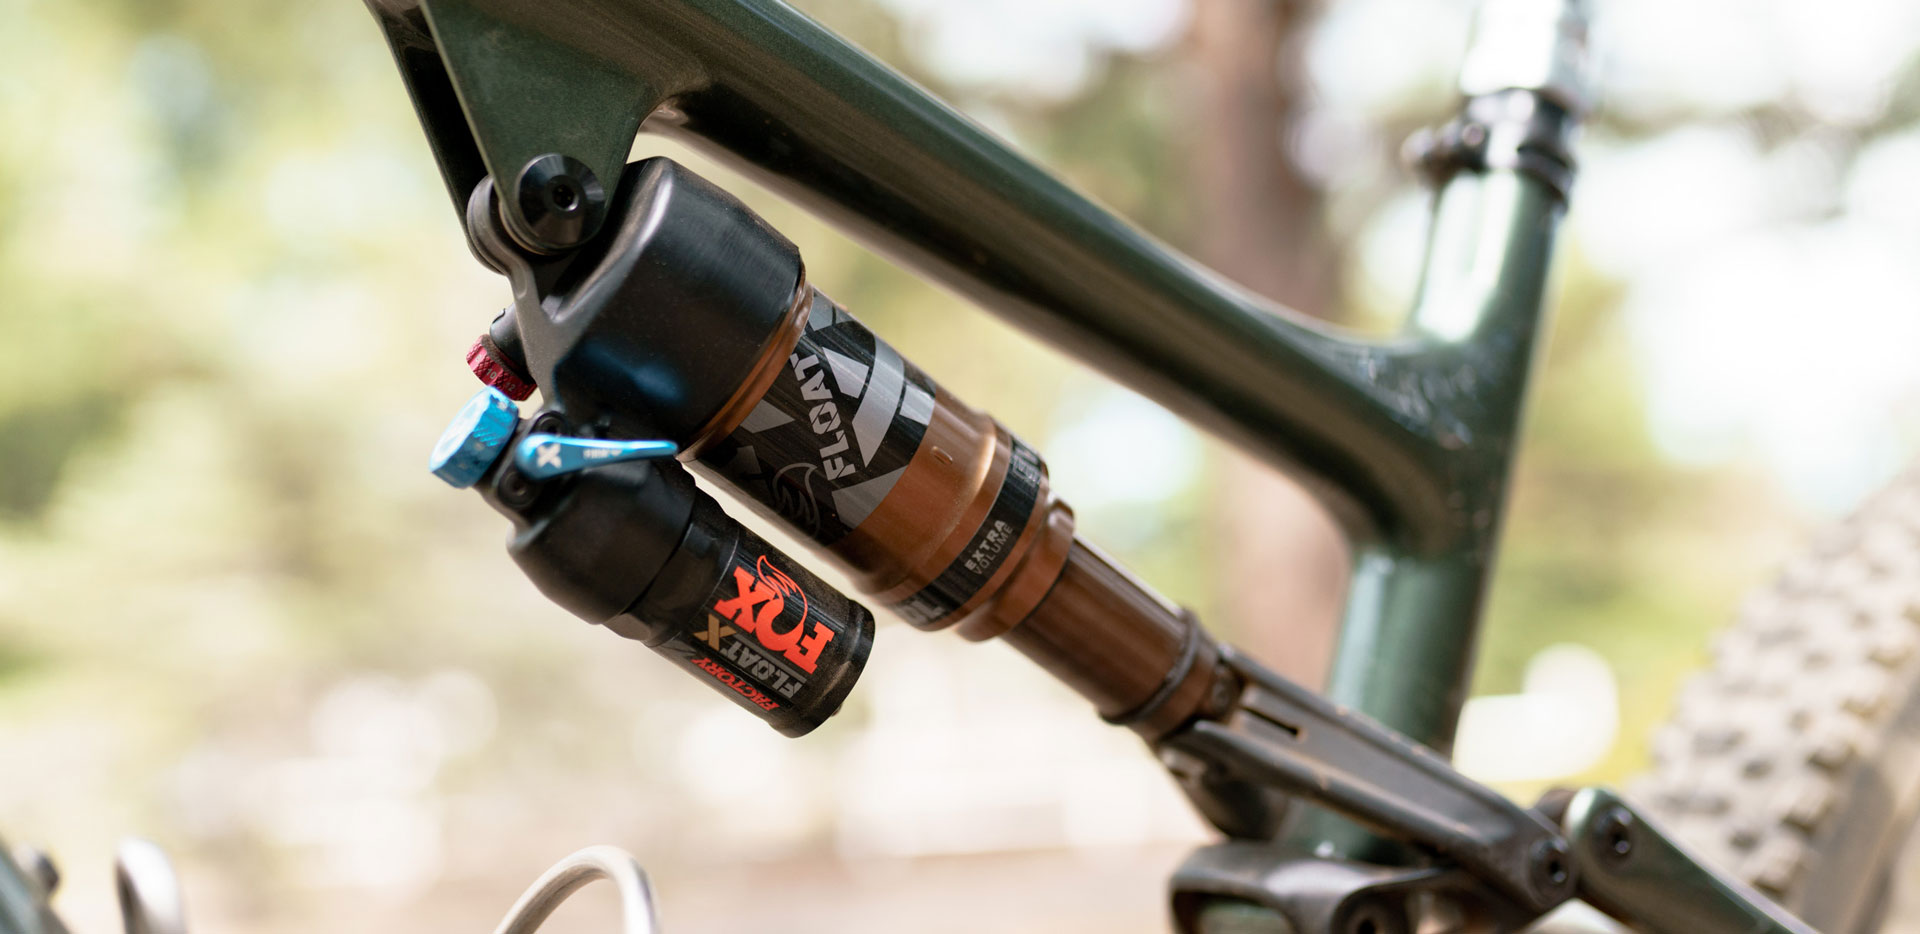 FOX 34 STEP-CAST FORK AND FLOAT X SHOCK Review